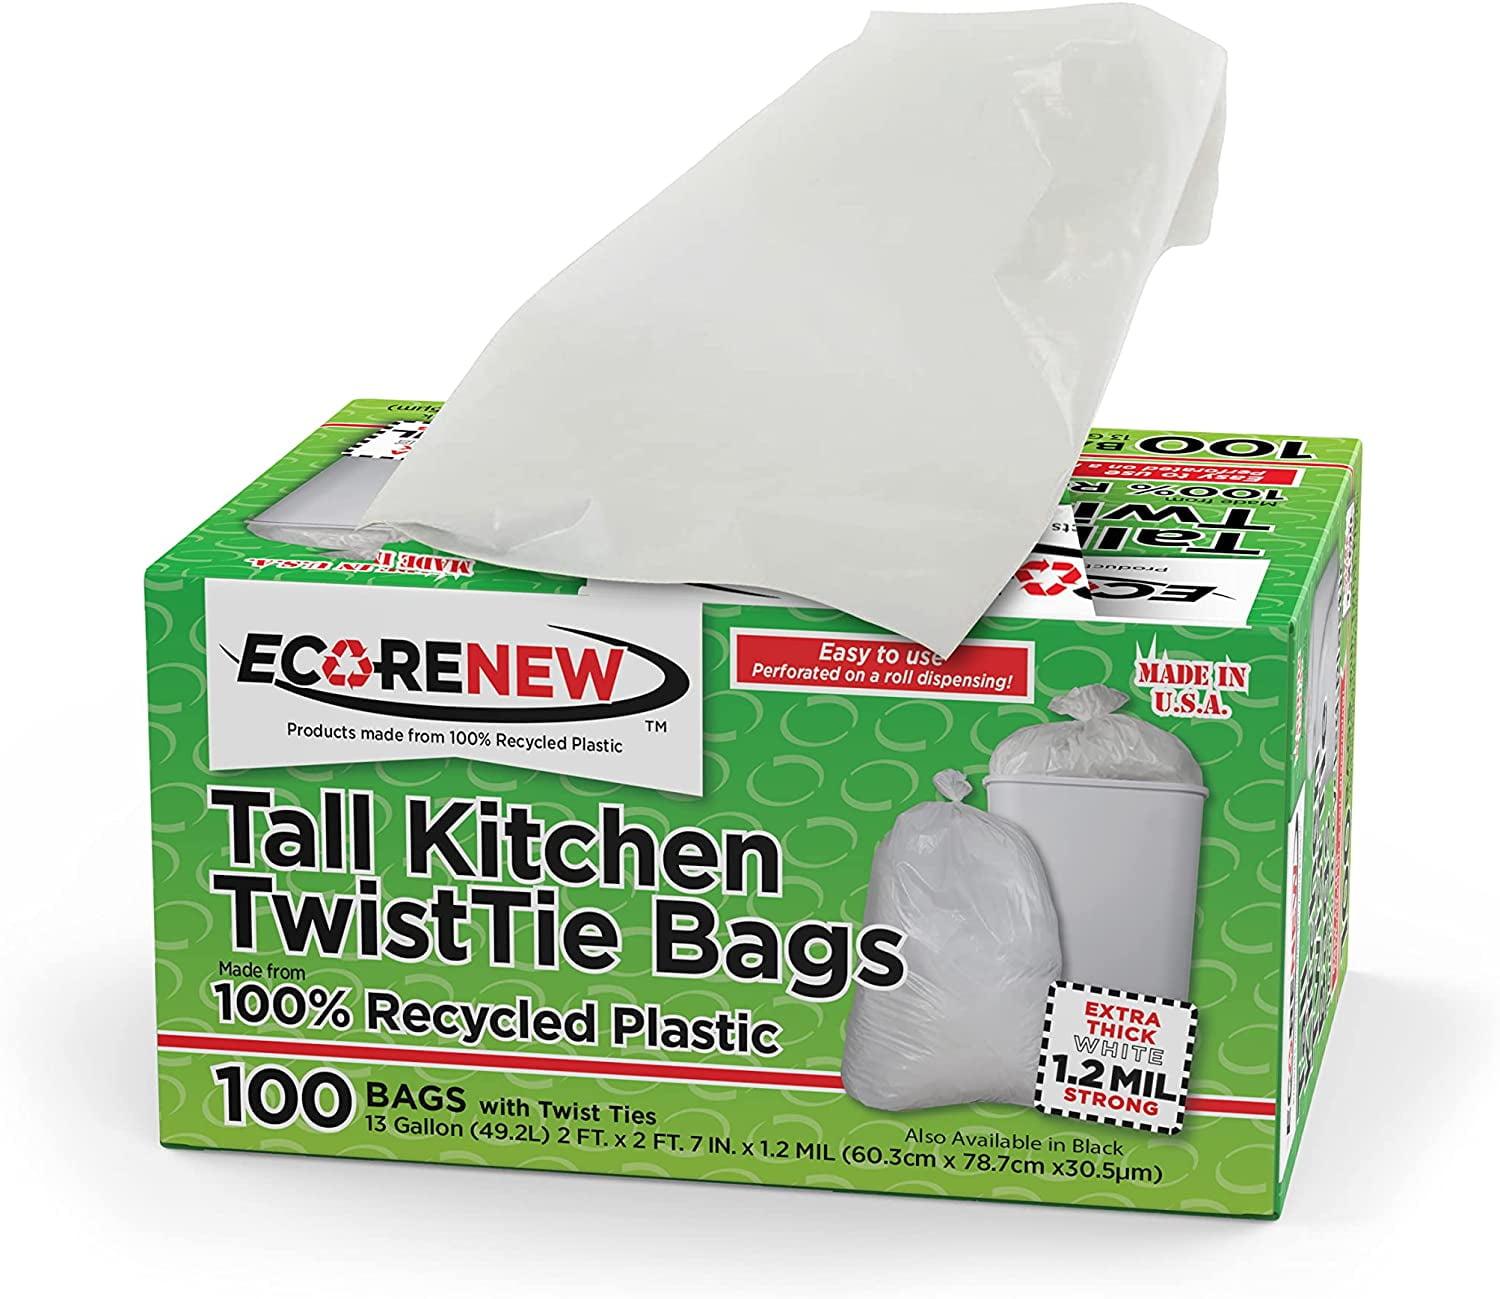 Eco Renew Tall Kitchen Trash Bags with Twist Ties, Extra Thick, 13 Gallon, Black, 100 Count, Men's, Size: One Size